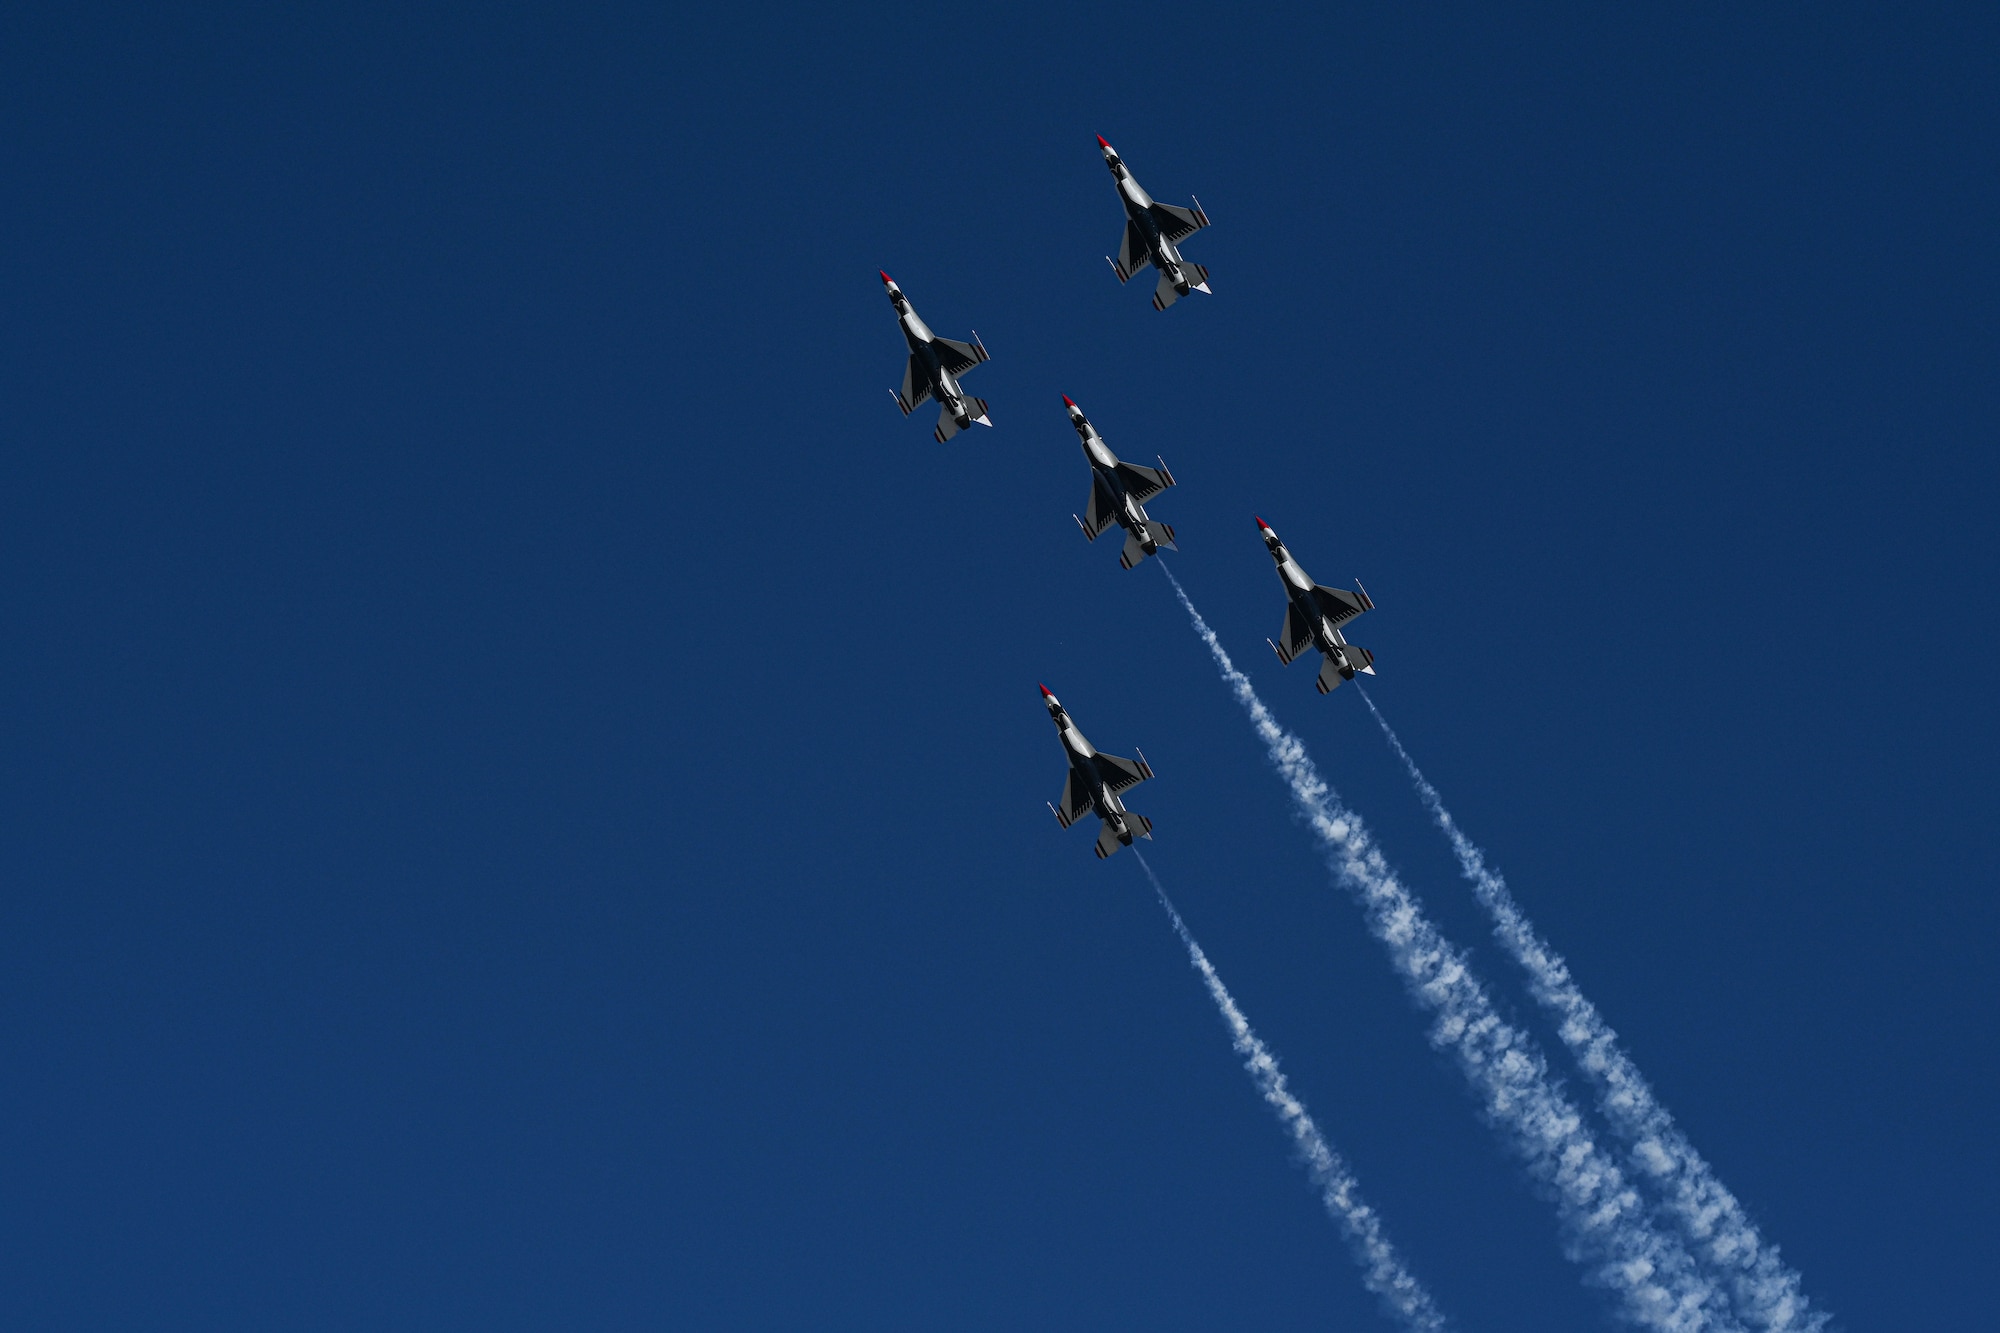 Five Thunderbirds flying in air.